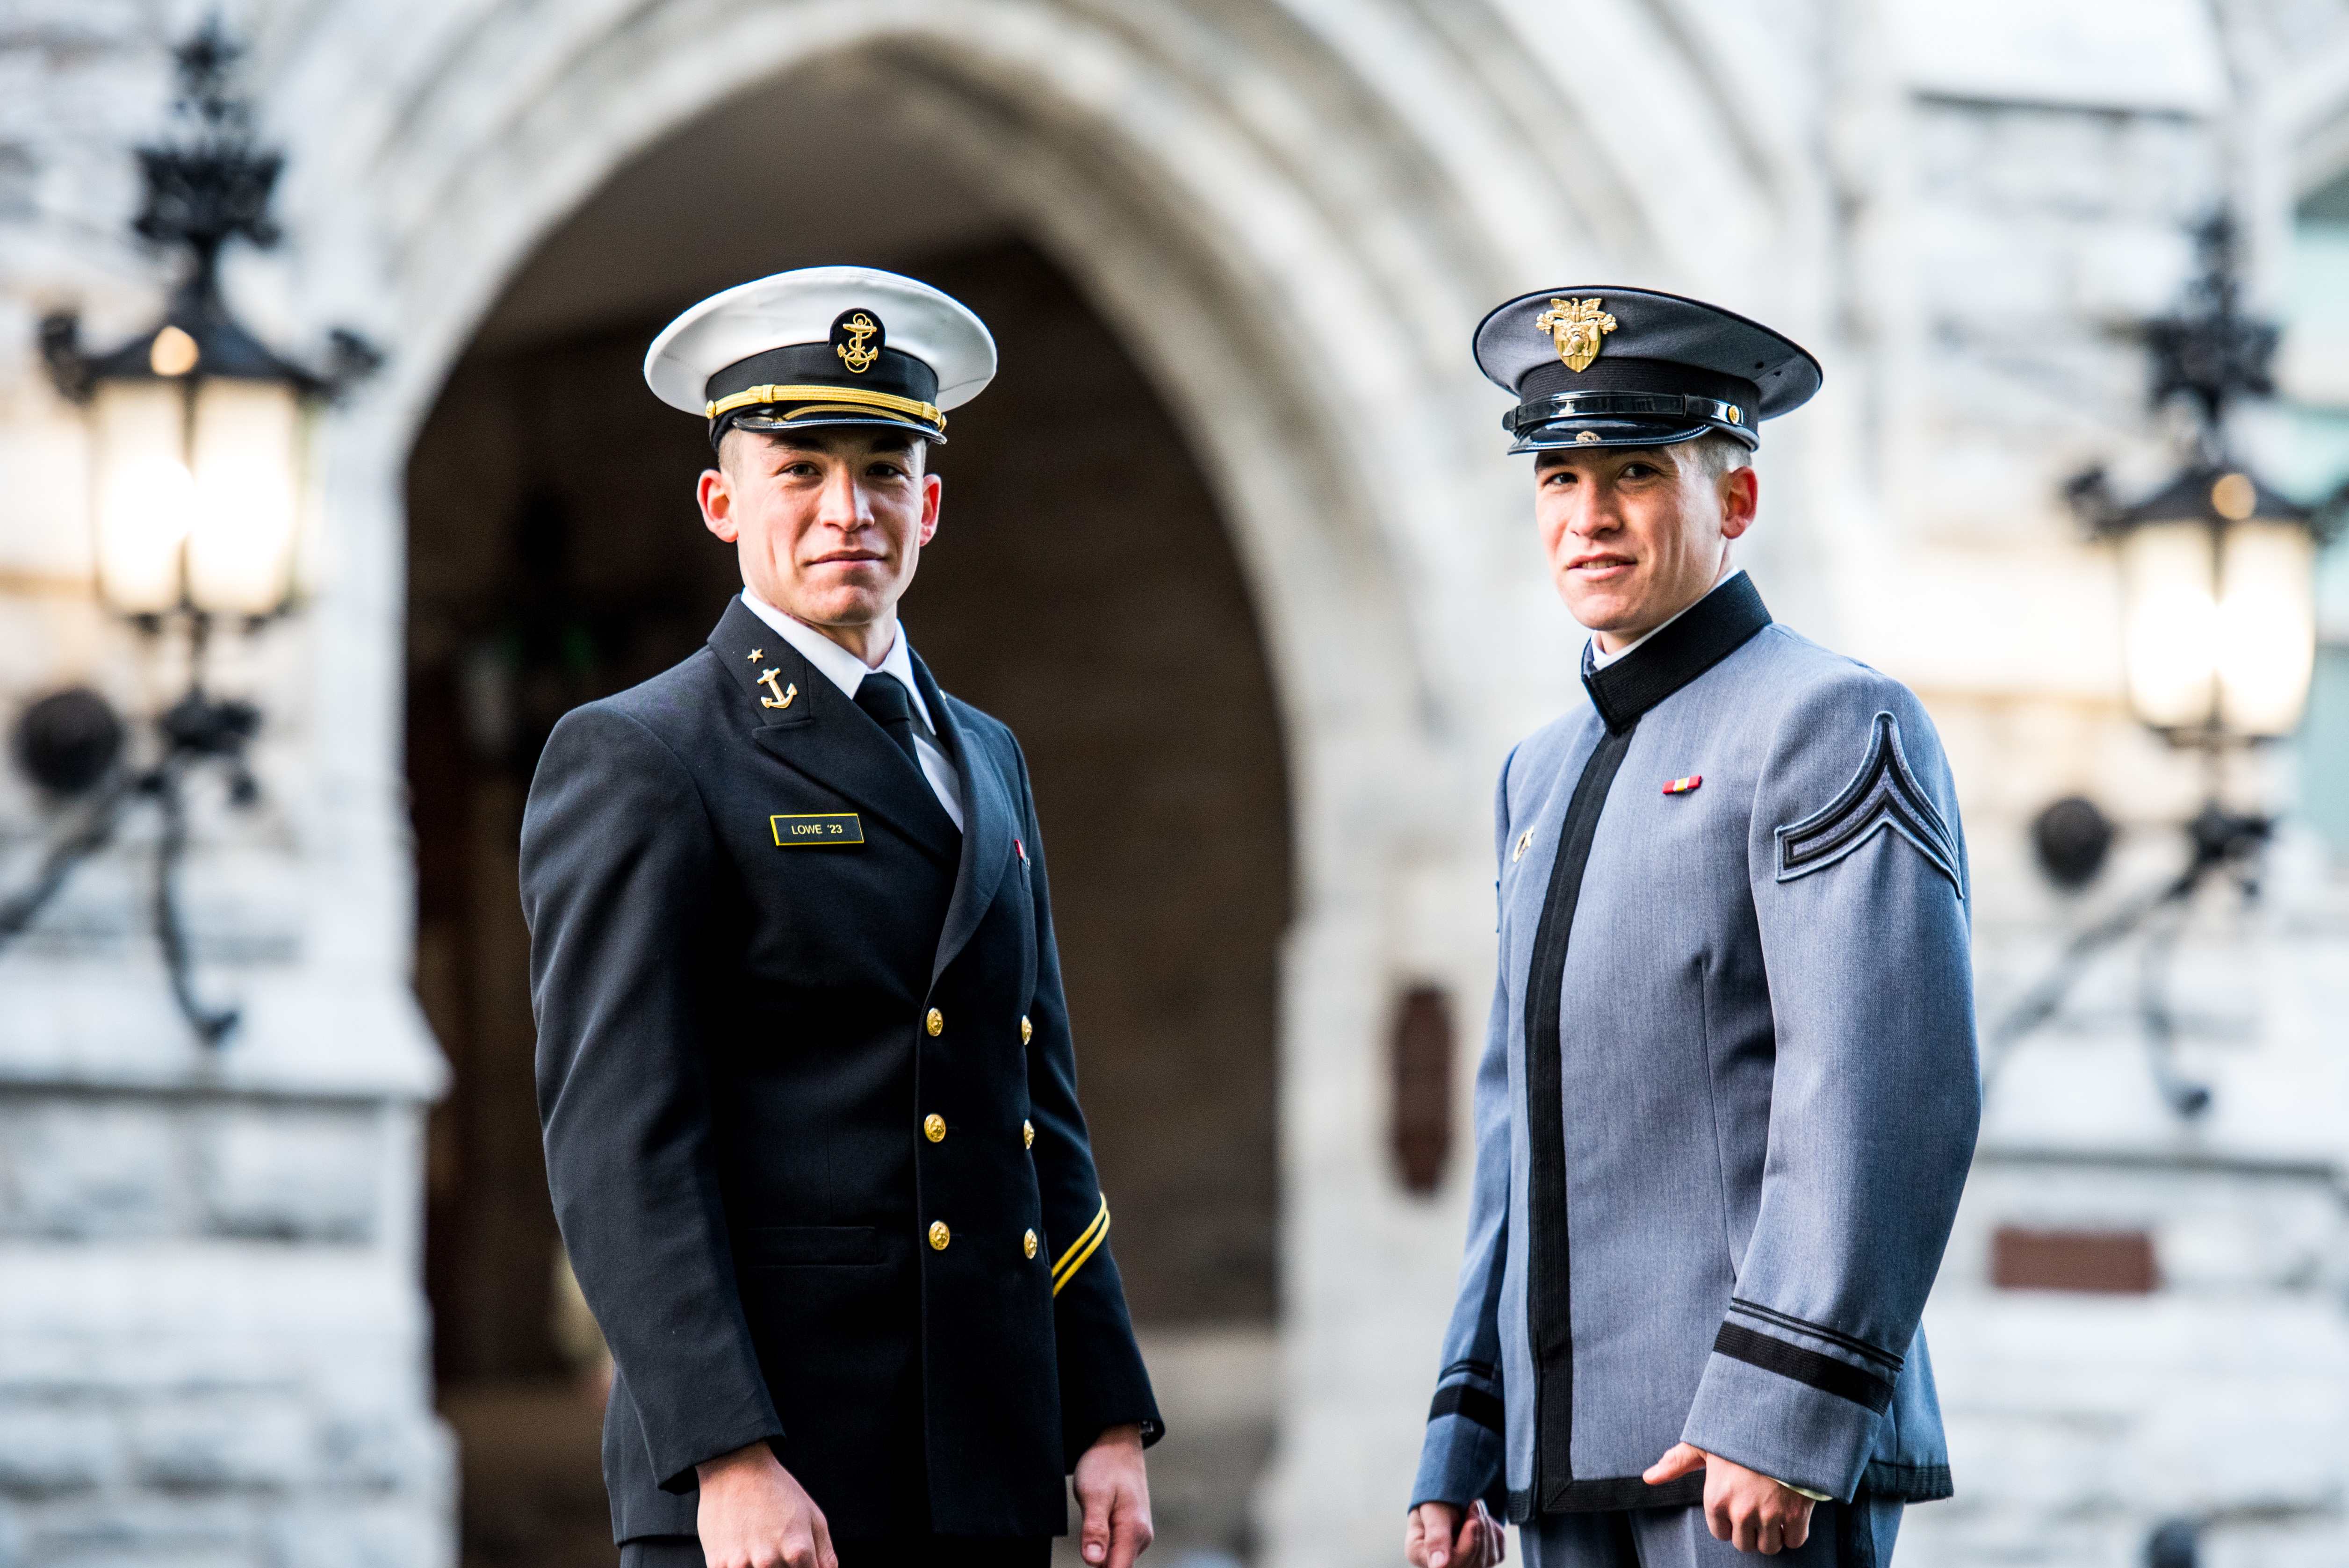 West Point's Army-Navy game uniforms to honor 82nd Airborne